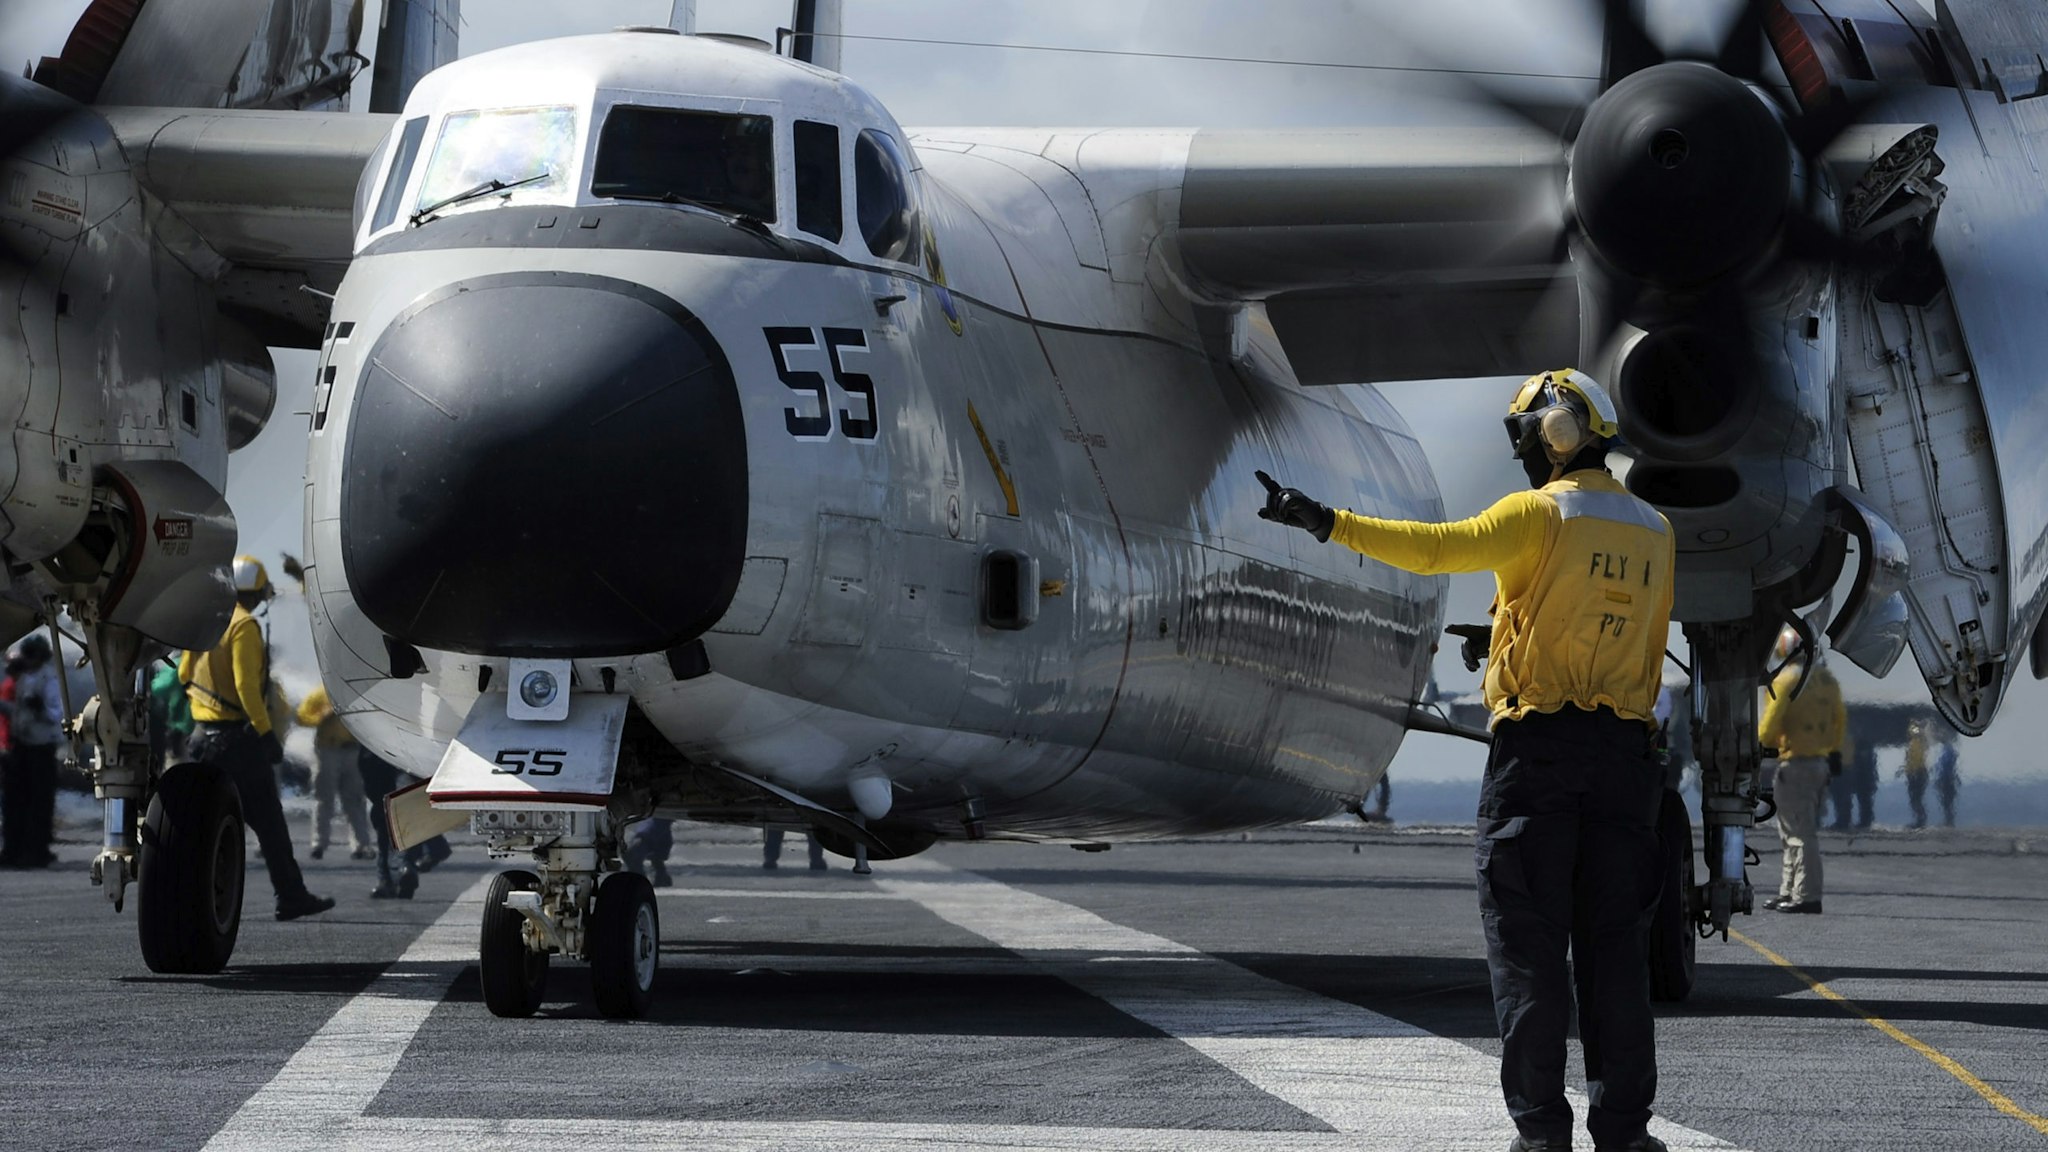 TLANTIC OCEAN, OCTOBER 20: In this U.S. Navy handout, aviation Boatswain's Mate (Handling) 1st Class Michael Osborne directs a C-2A Greyhound, assigned to the "Rawhides" of Fleet Logistics Support Squadron (VRC) 40, on the flight deck aboard USS Harry S. Truman (CVN 75) on October 20, 2017 in the Atlantic Ocean. Truman is currently underway conducting Tailored Shipboard Test Availability and Final Evaluation Problem (TSTA/FEP) in preparation for future operations. (Photo by Mass Communication Specialist 2nd Class Anthony Flynn/U.S. Navy via Getty Images)TLANTIC OCEAN, OCTOBER 20: In this U.S. Navy handout, aviation Boatswain's Mate (Handling) 1st Class Michael Osborne directs a C-2A Greyhound, assigned to the "Rawhides" of Fleet Logistics Support Squadron (VRC) 40, on the flight deck aboard USS Harry S. Truman (CVN 75) on October 20, 2017 in the Atlantic Ocean. Truman is currently underway conducting Tailored Shipboard Test Availability and Final Evaluation Problem (TSTA/FEP) in preparation for future operations. (Photo by Mass Communication Specialist 2nd Class Anthony Flynn/U.S. Navy via Getty Images)